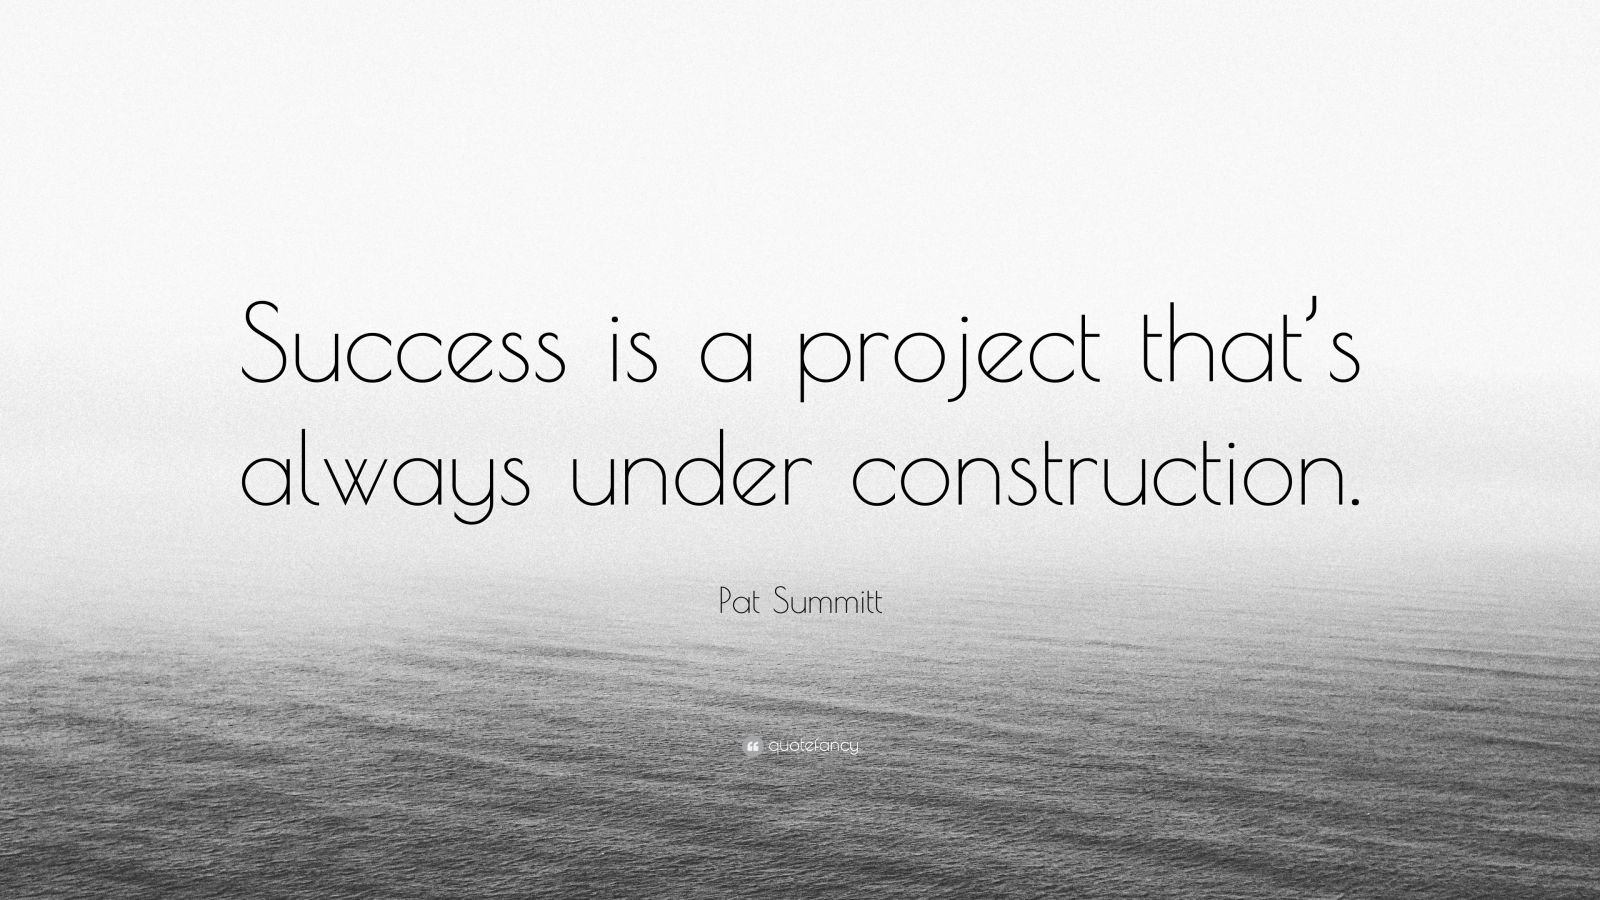 Pat Summitt Quote: “Success is a project that’s always under